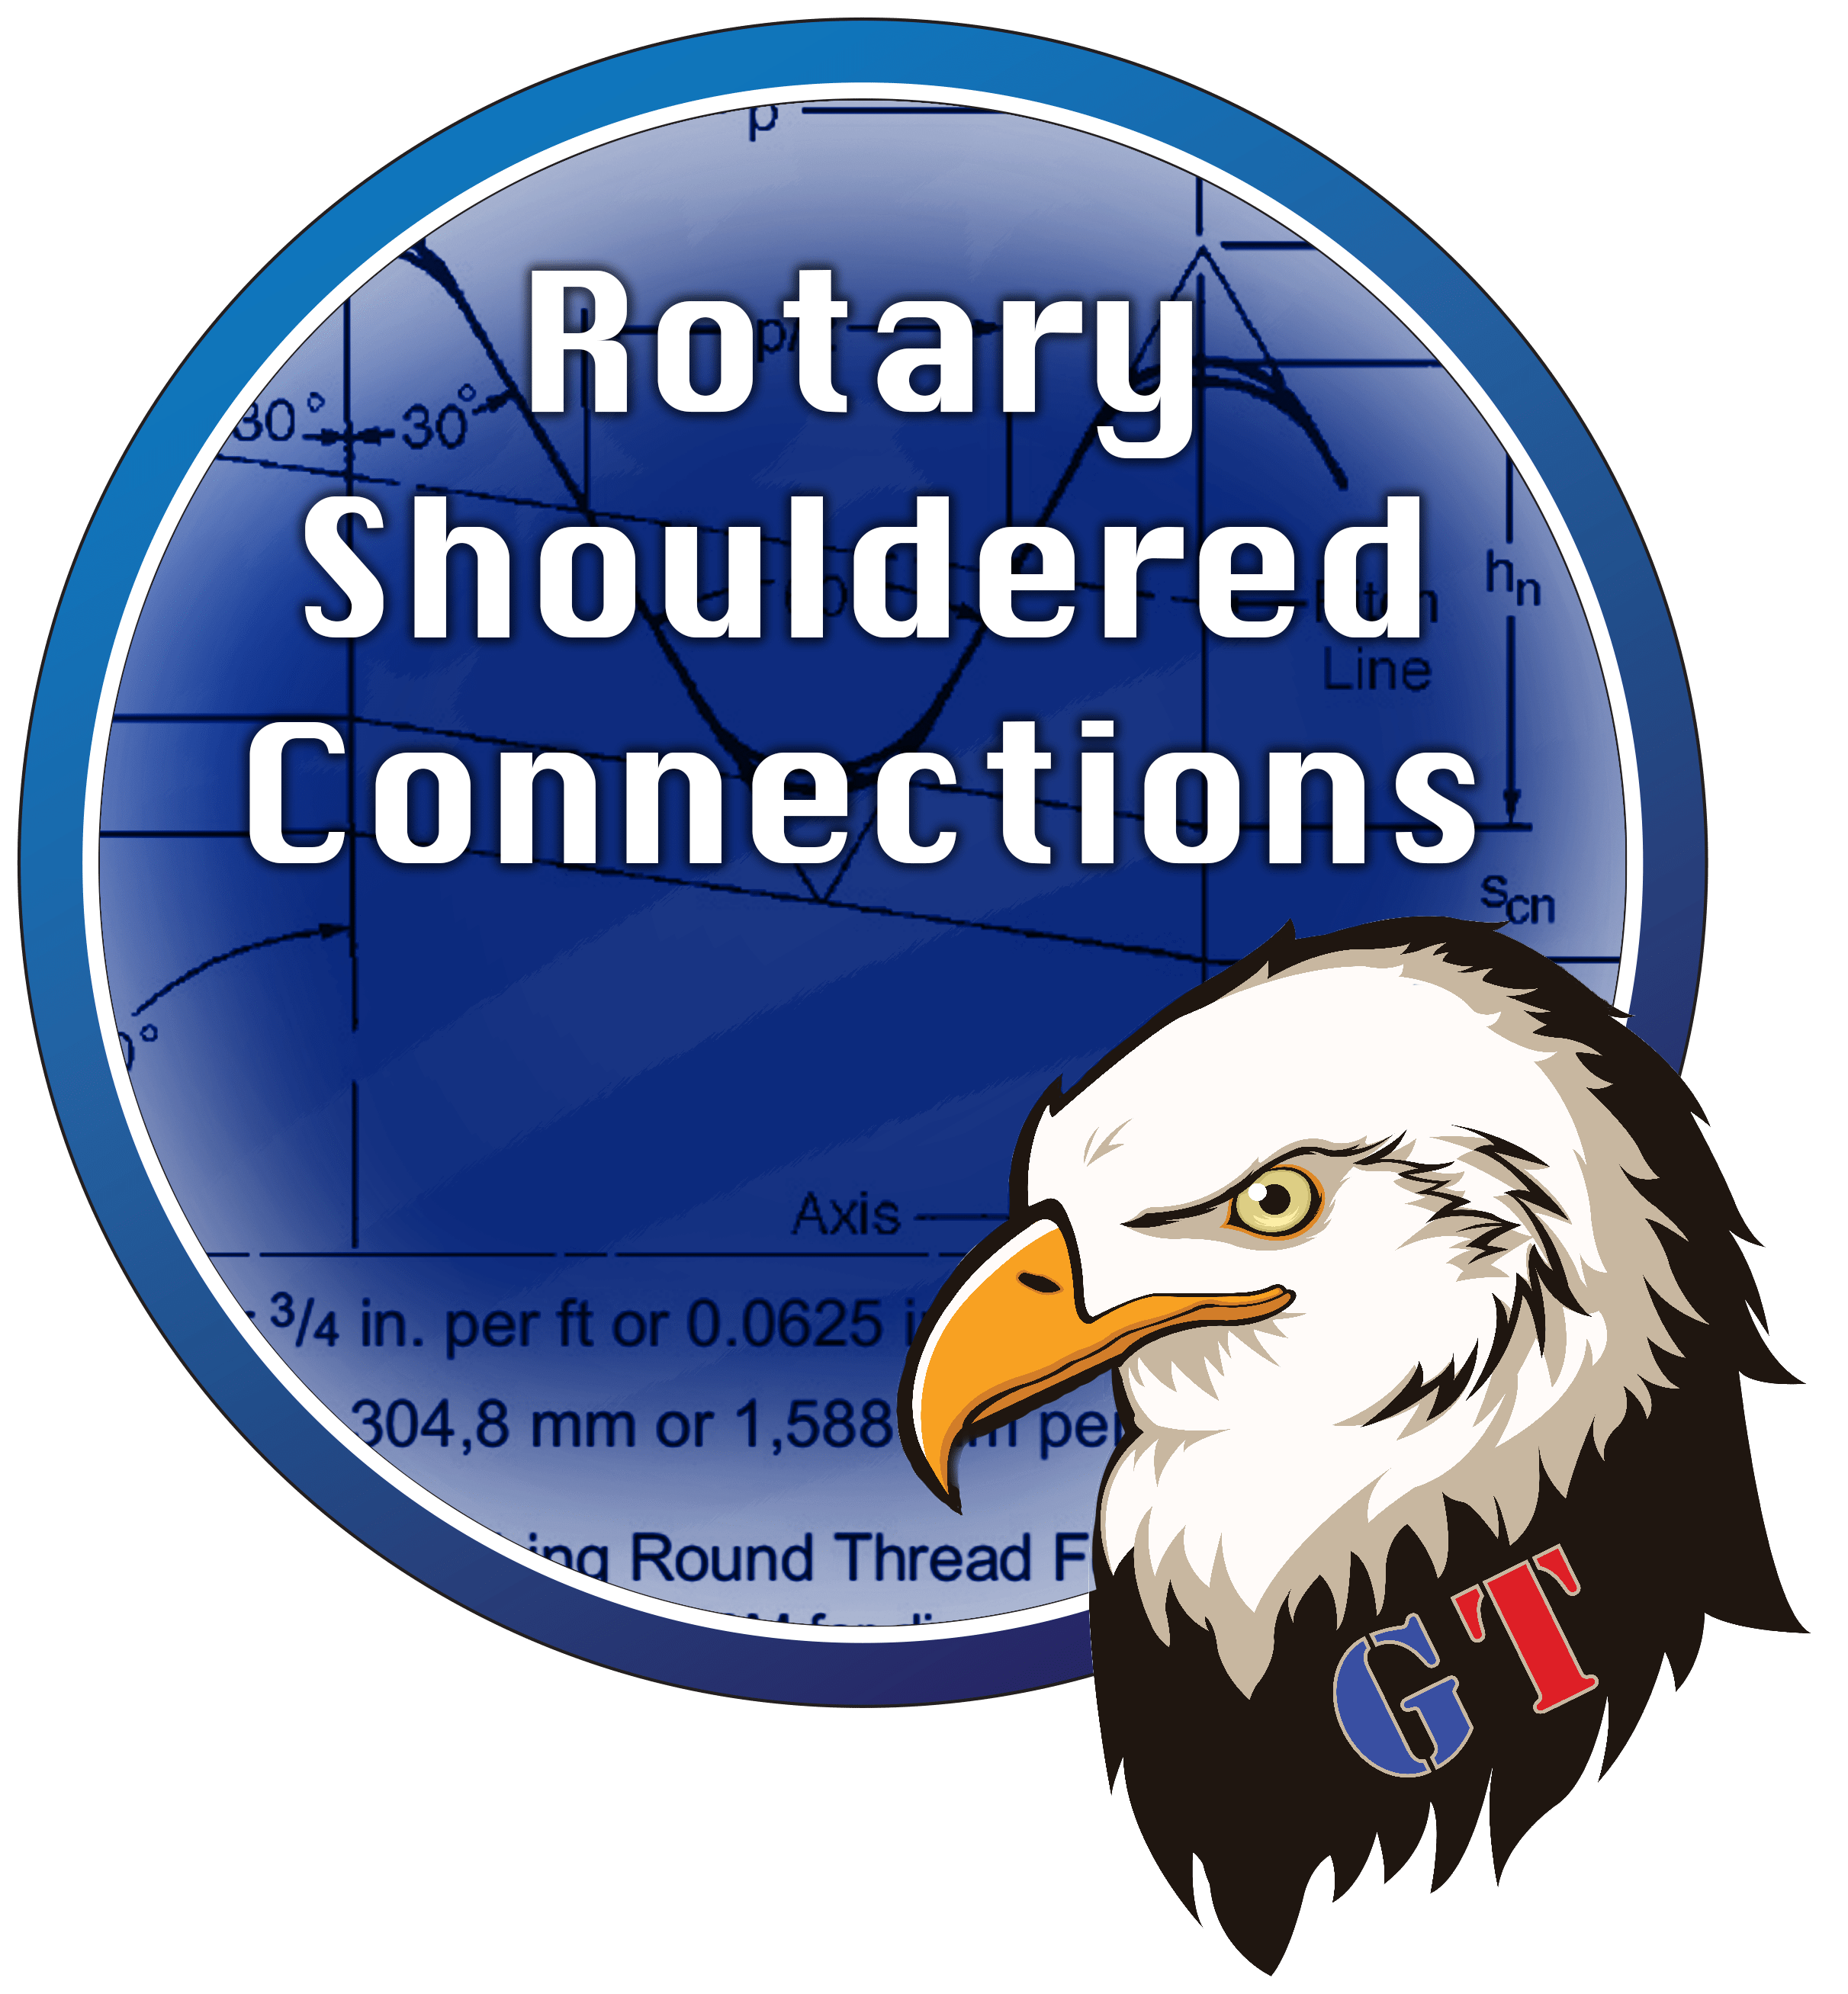 Rotary Shouldered Connections